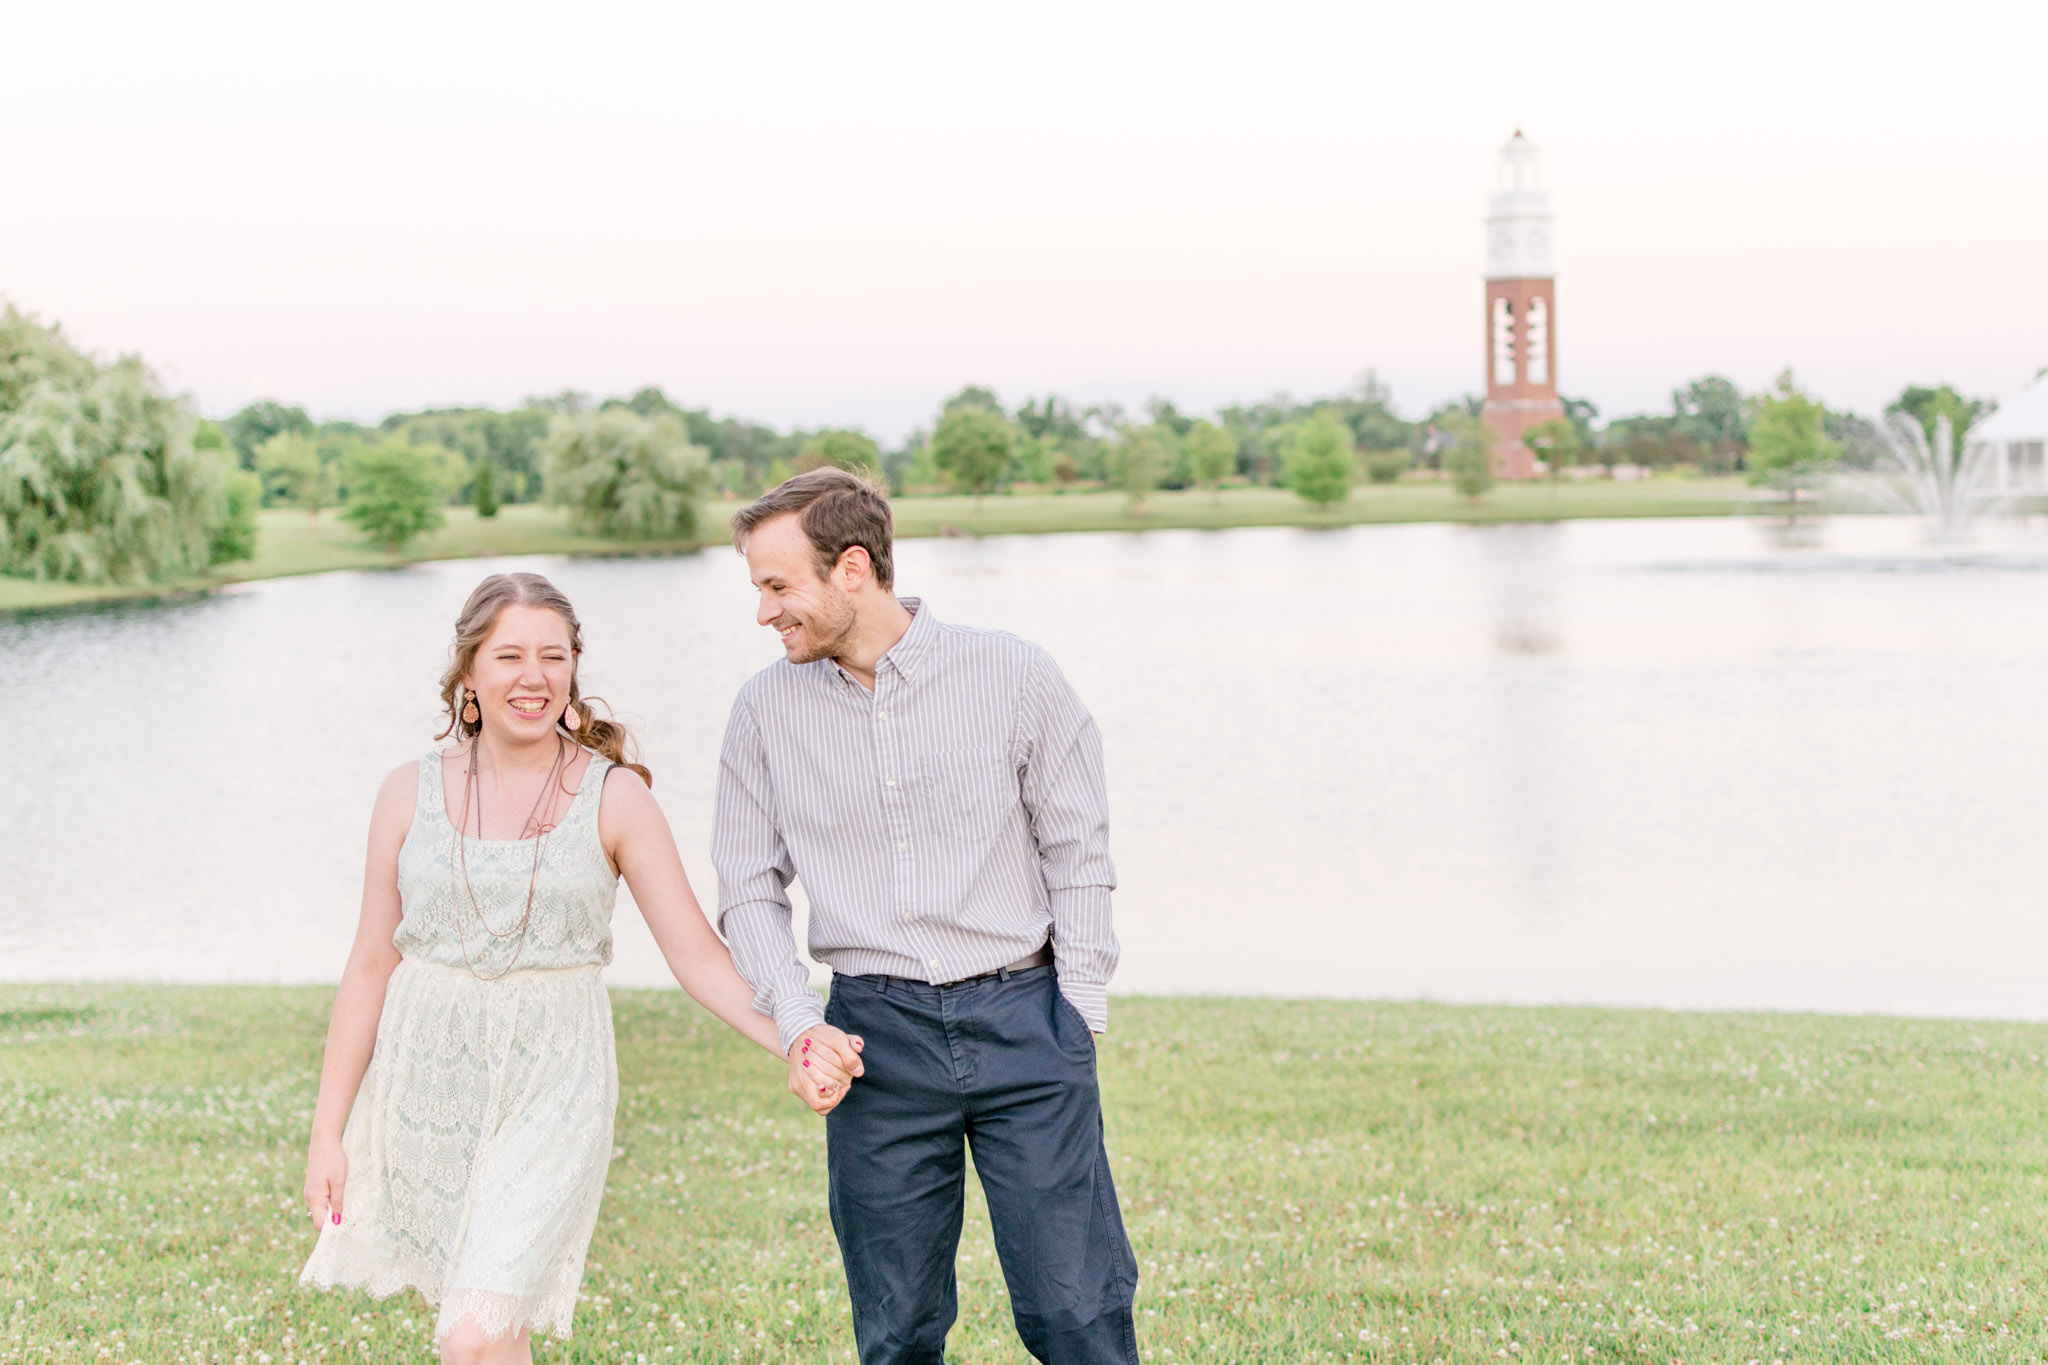 Couple laughs during Coxhall Gardens engagement session in Carmel, Indiana